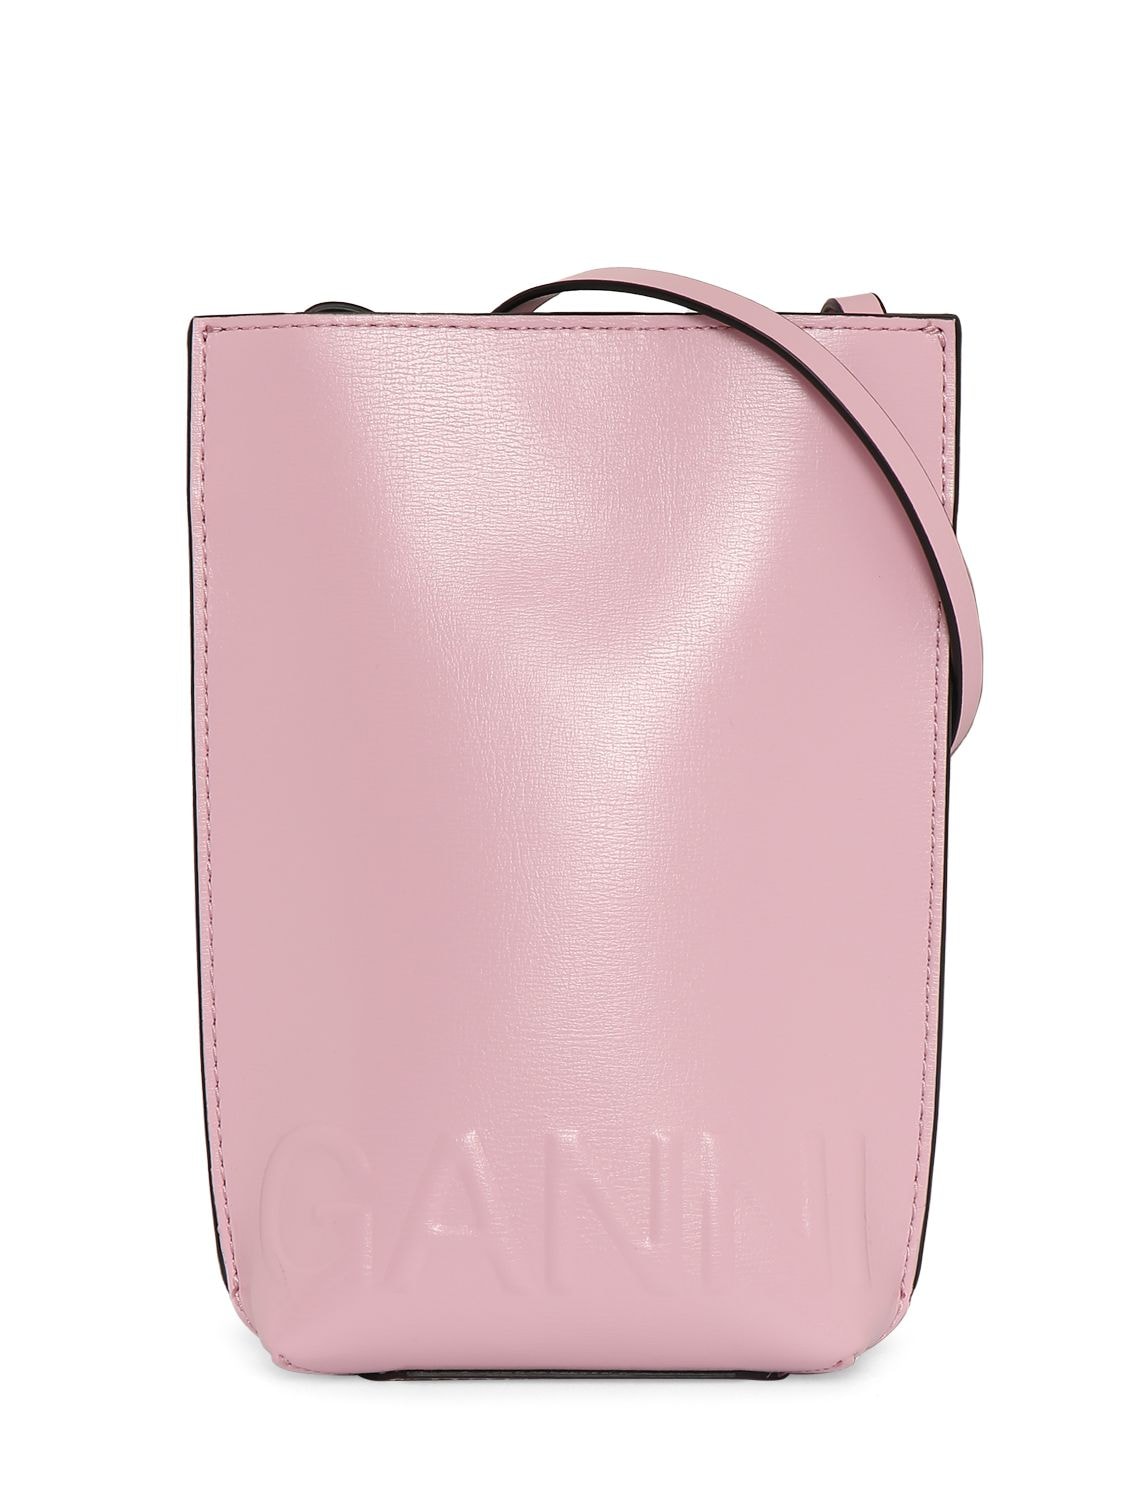 GANNI SMALL BANNER RECYCLED LEATHER CROSSBODY